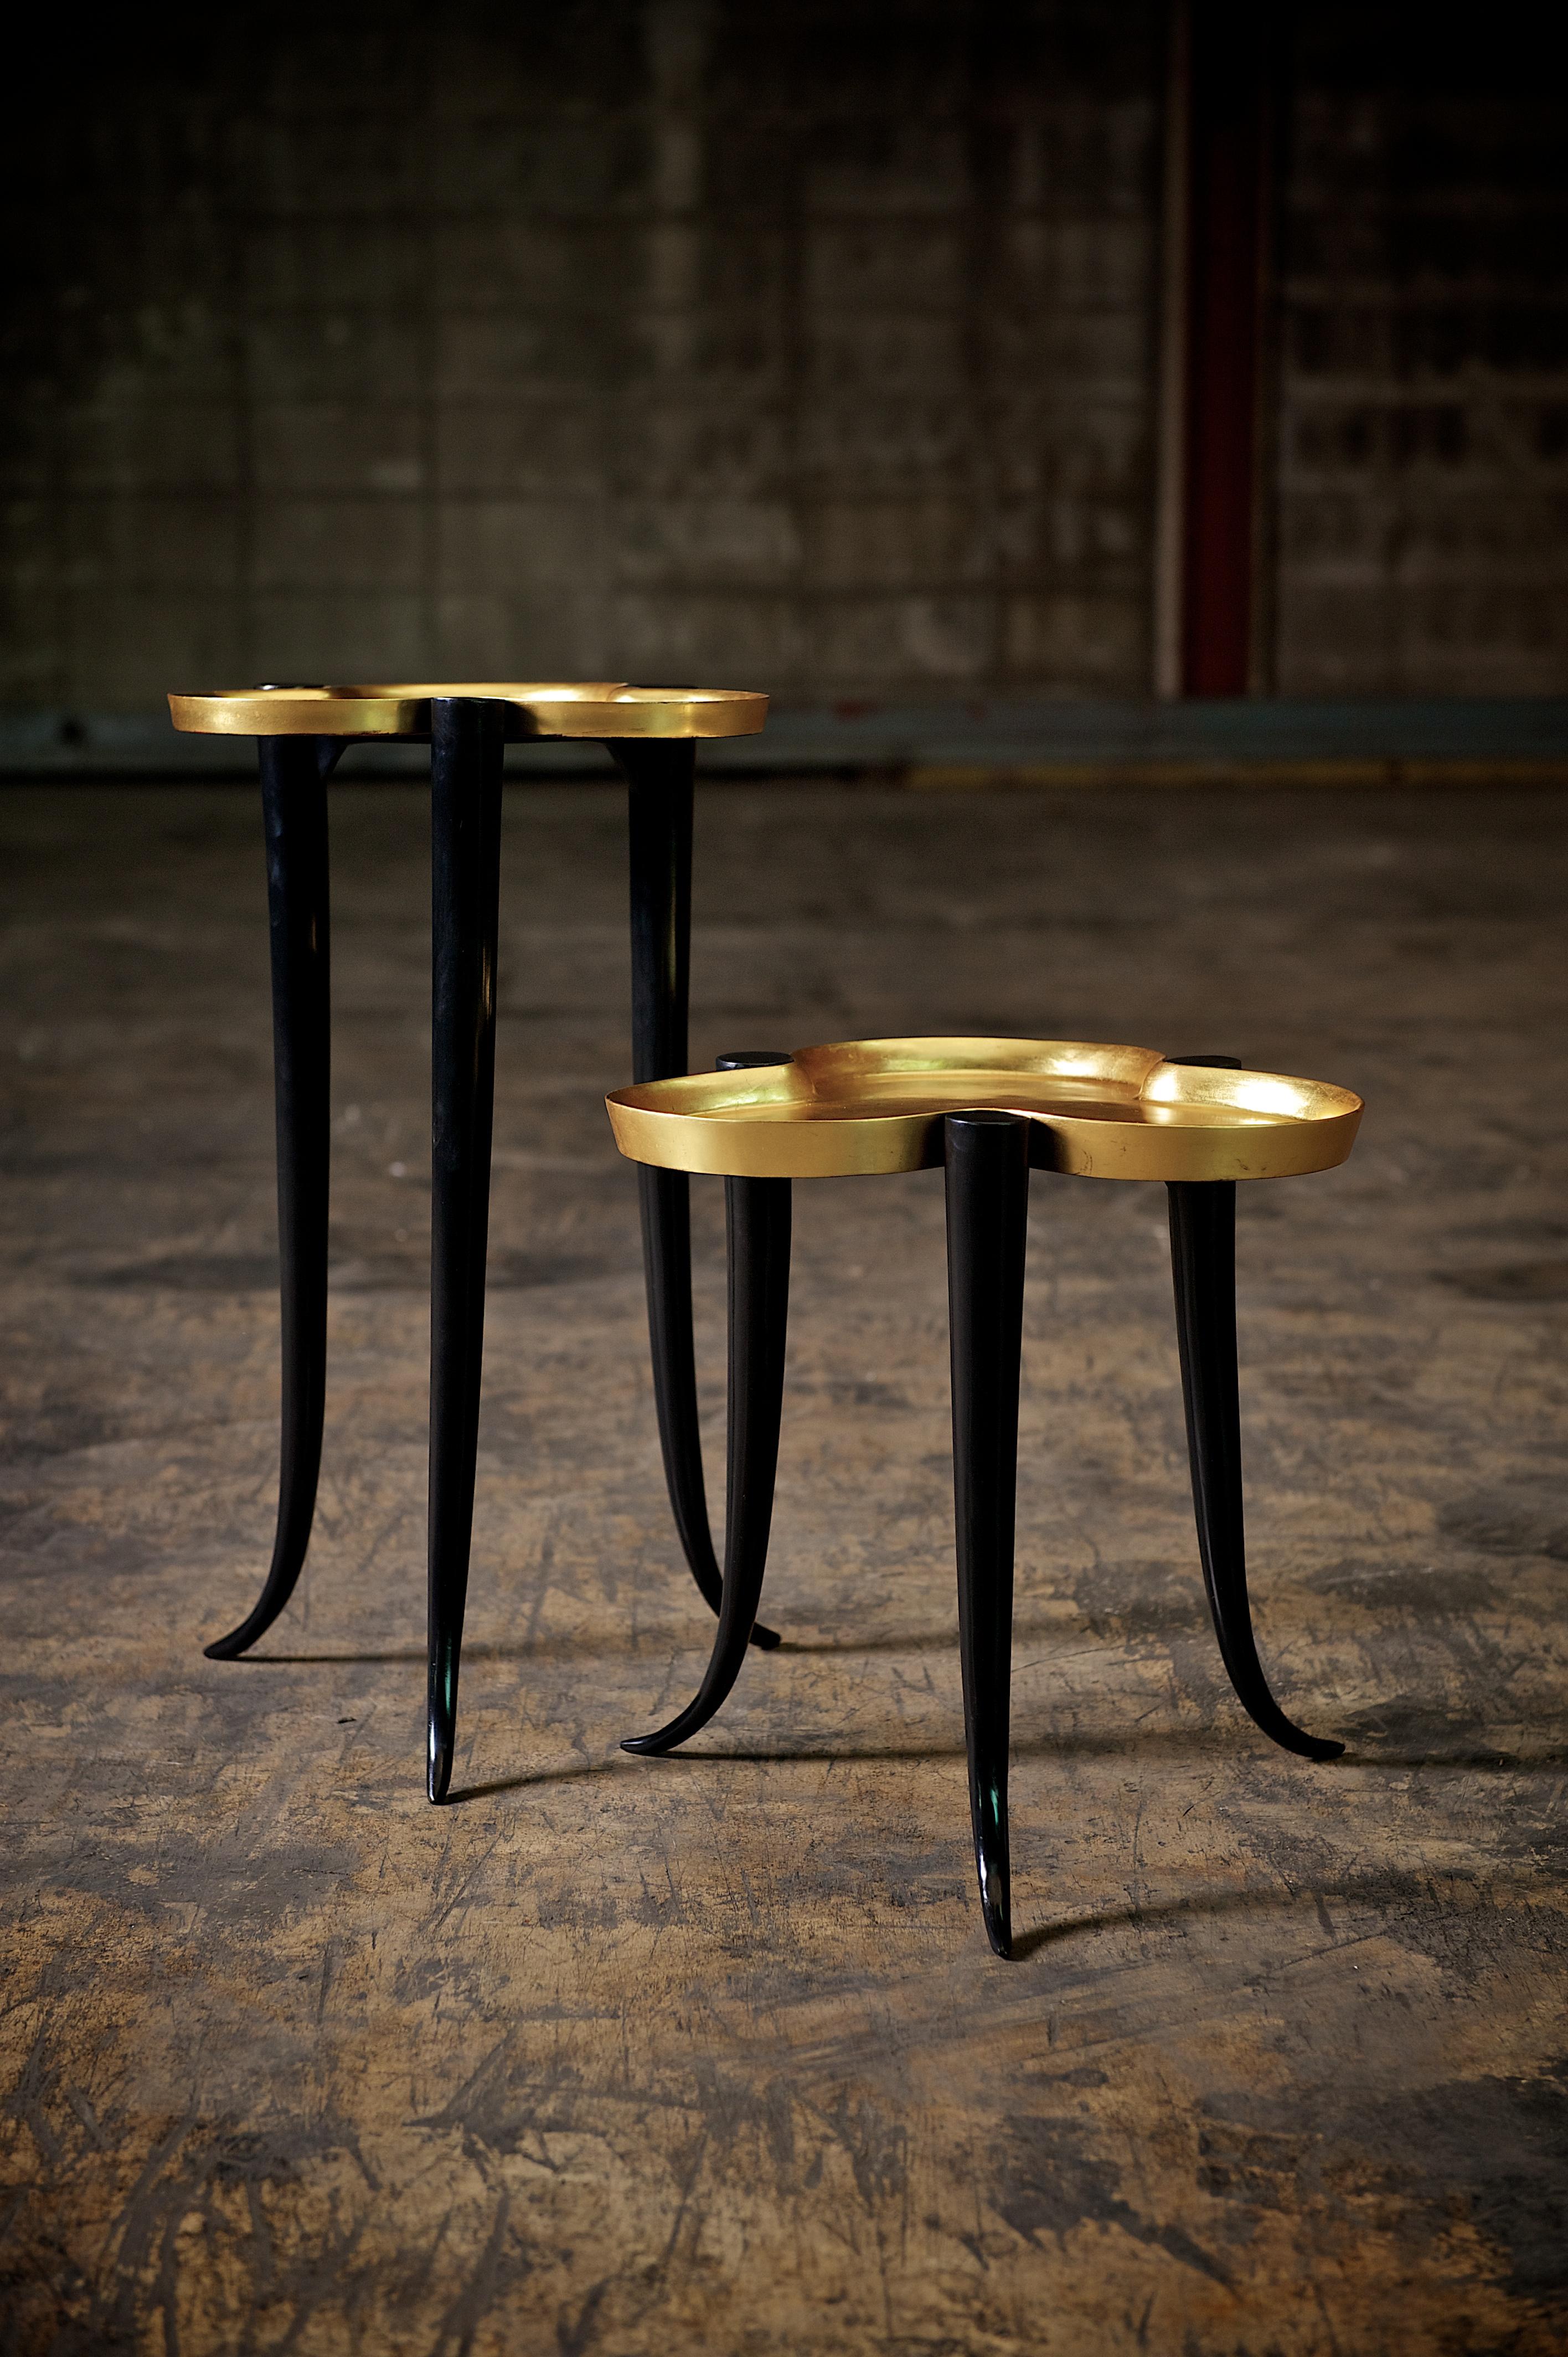 Tall Chime Side Table in Bronze and Silver or Gold Leaf Lacquer by Elan Atelier.

The Chime side table is composed of cast bronze legs with a gilt lacquer trey top. The Chime is available with either a silver leaf or gold leaf lacquer top. Custom